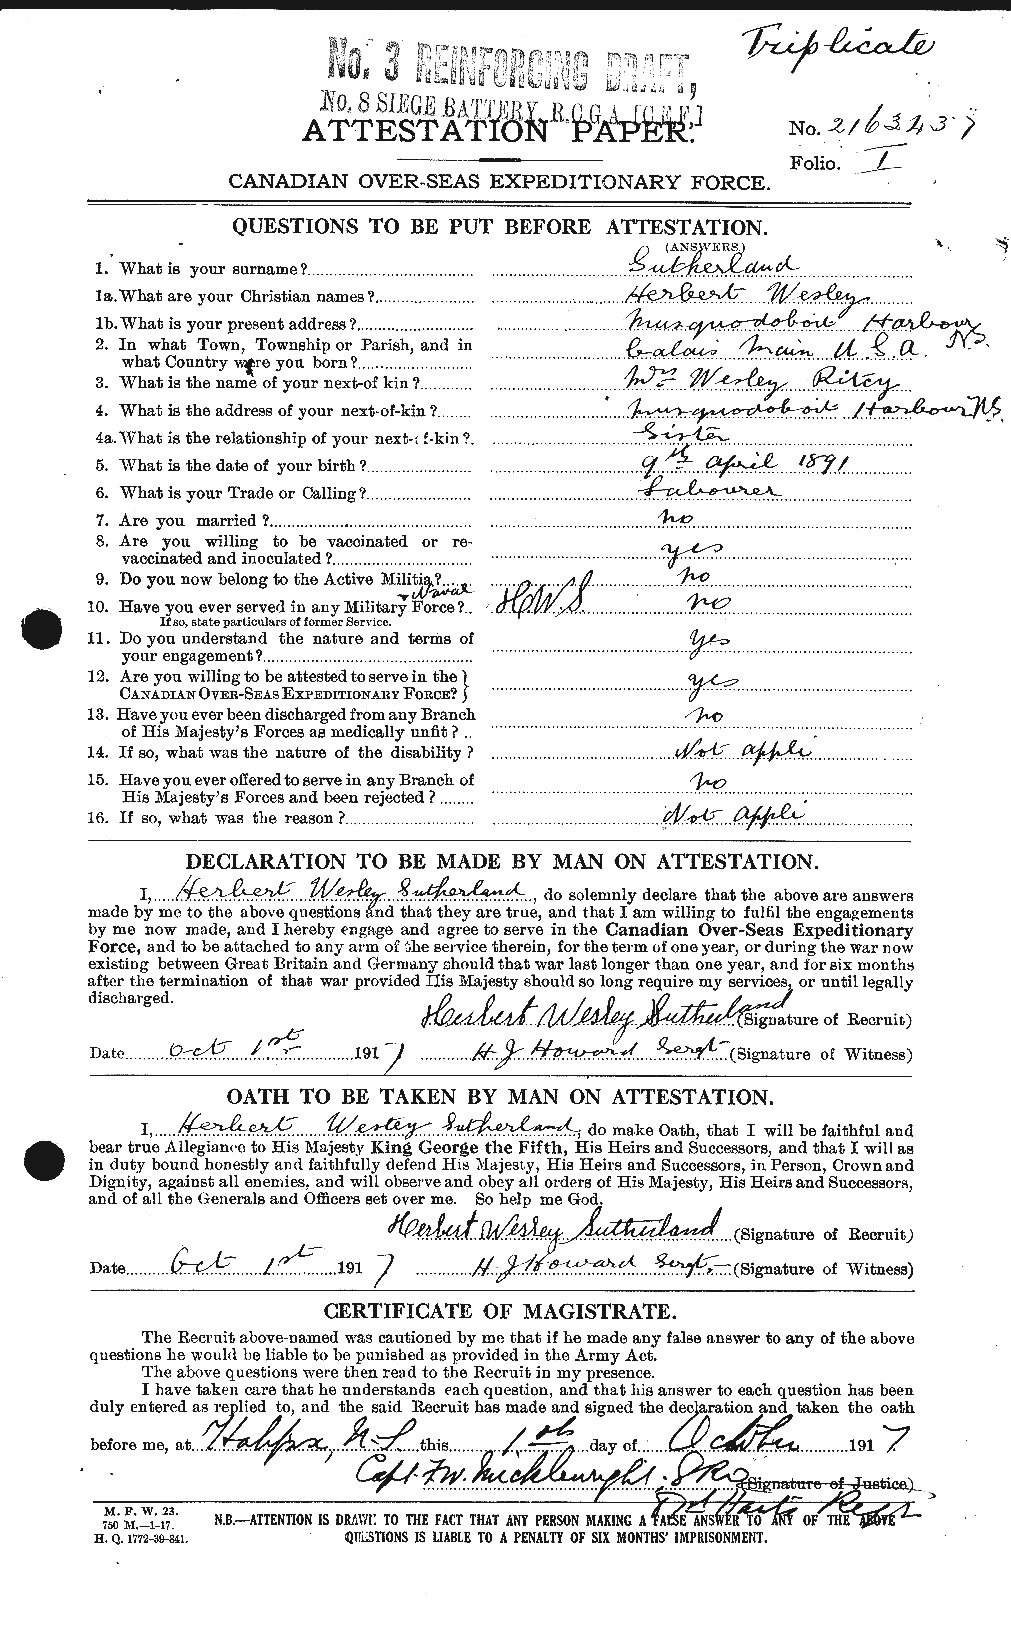 Personnel Records of the First World War - CEF 124803a